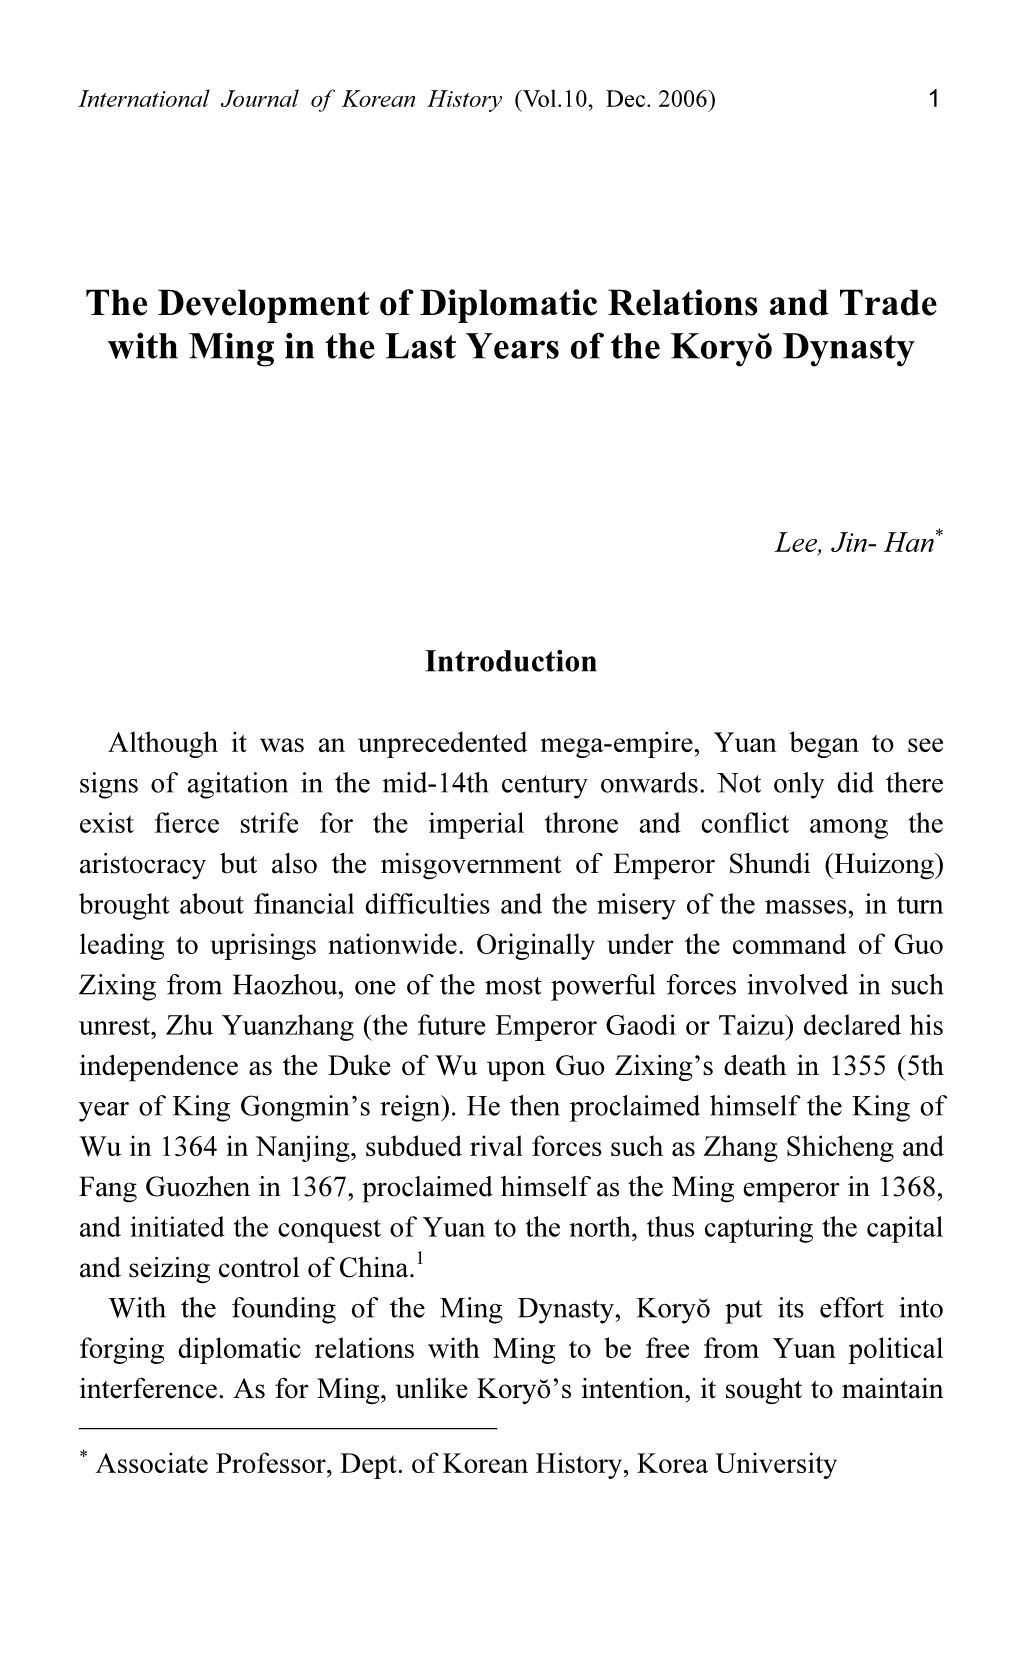 The Development of Diplomatic Relations and Trade with Ming in the Last Years of the Koryŏ Dynasty